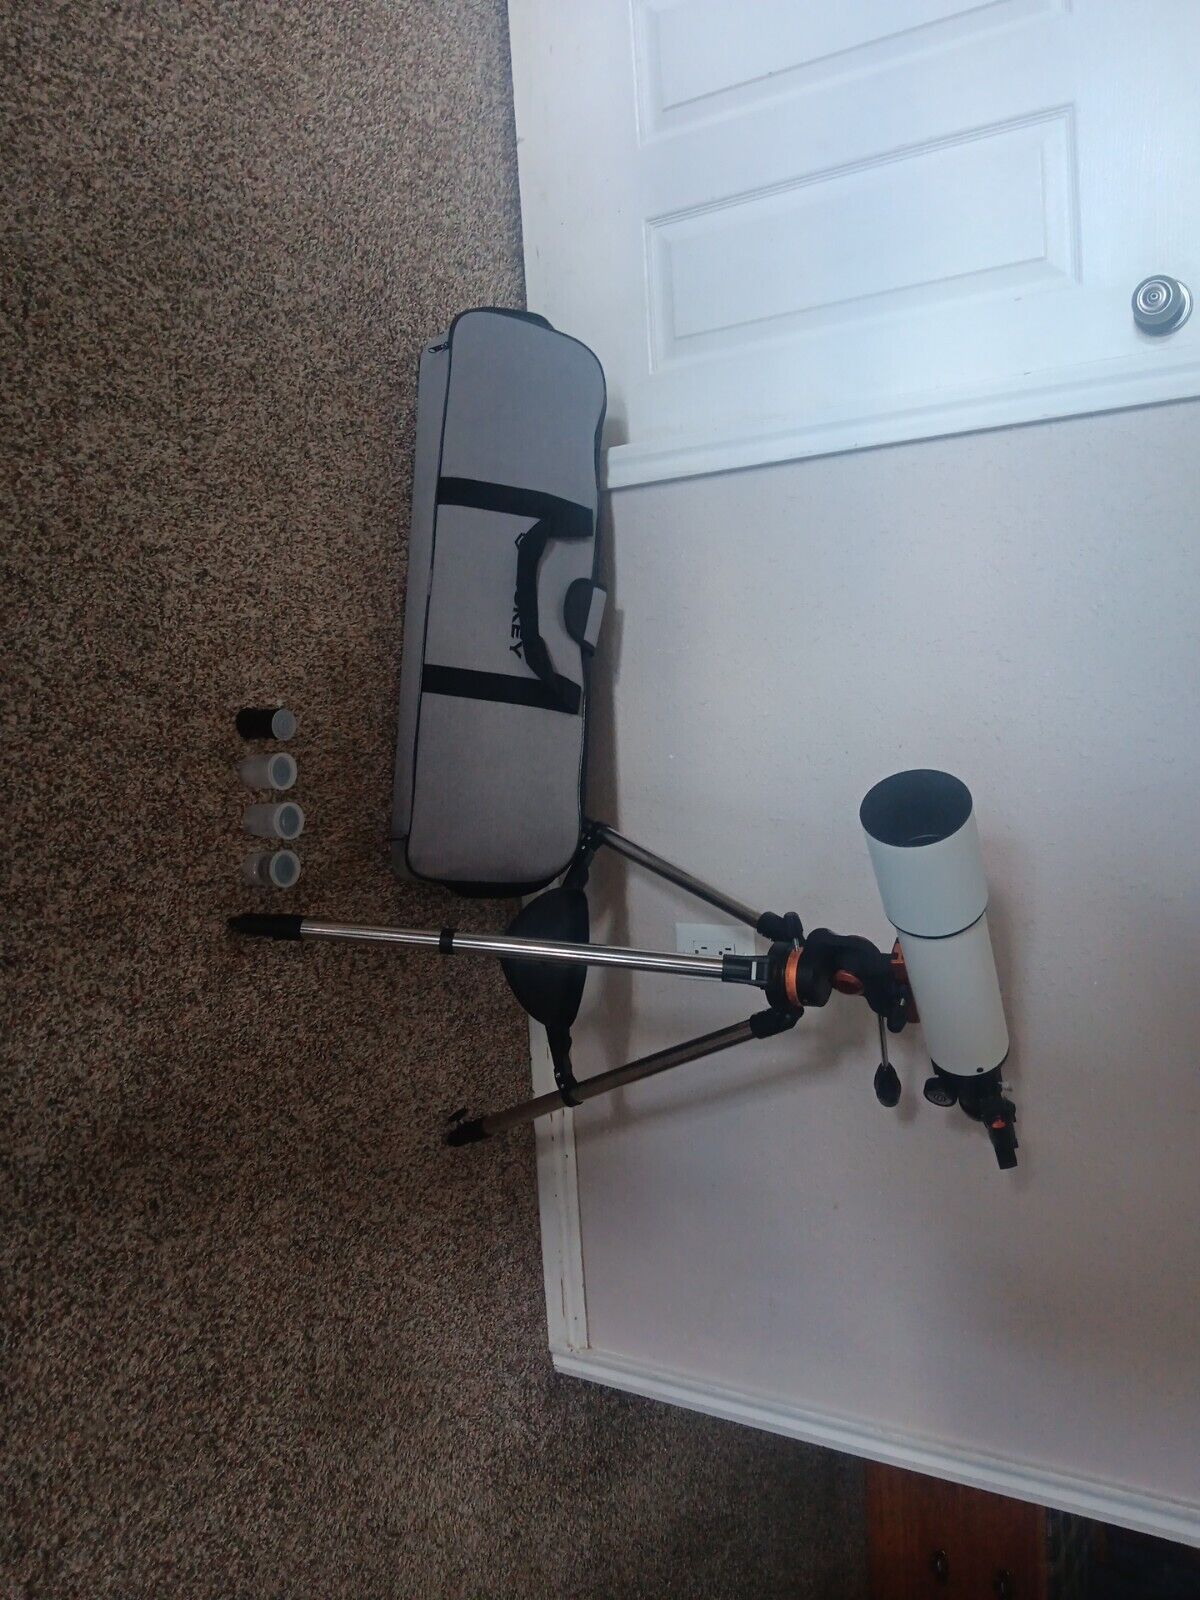 Telescope for Astronomy for Adult Beginners - Professional, Portable and Powe...